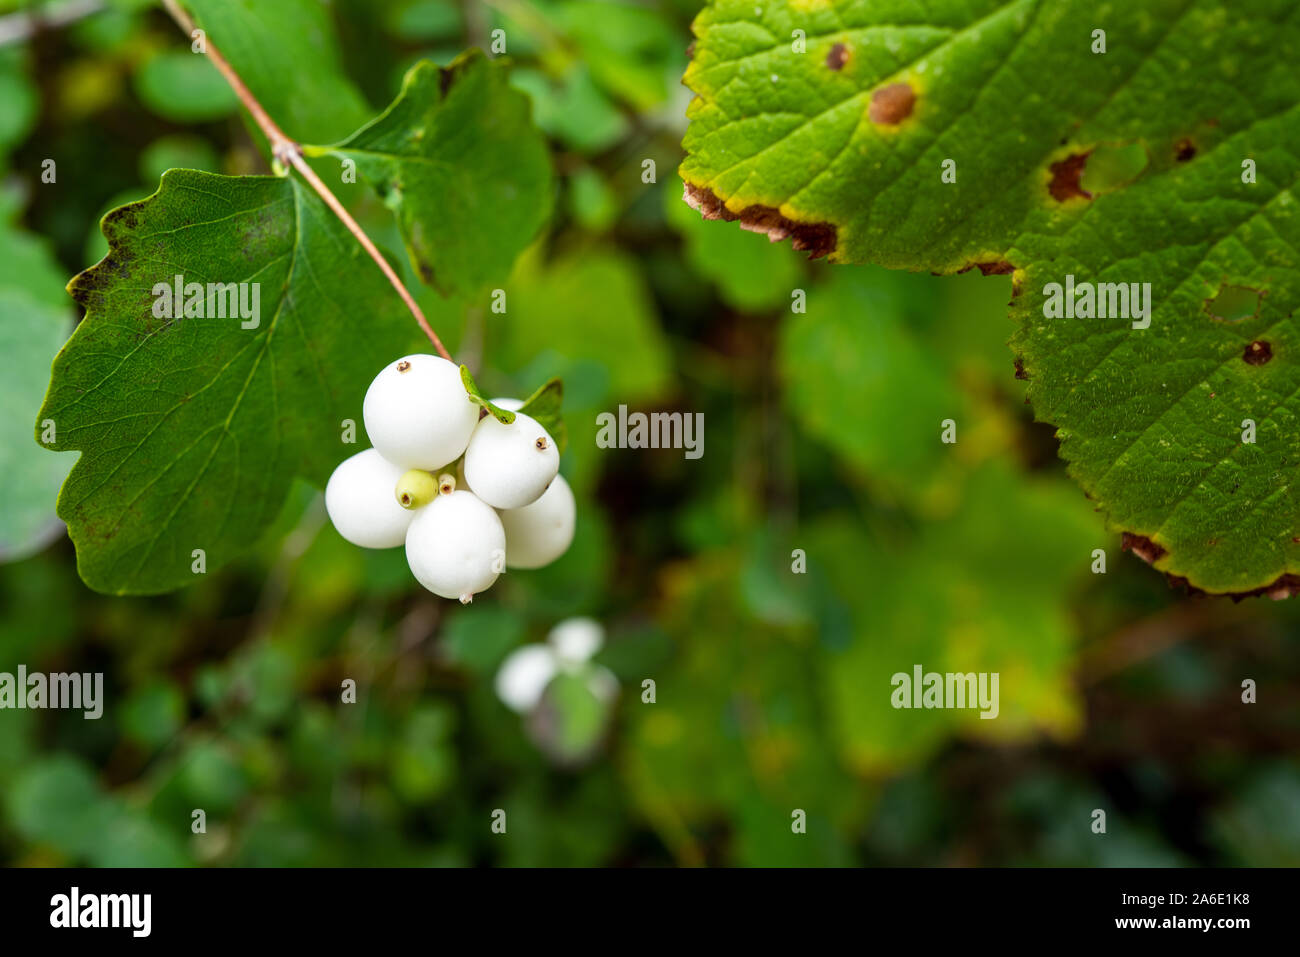 Detailed view of snowberries and leaves Stock Photo